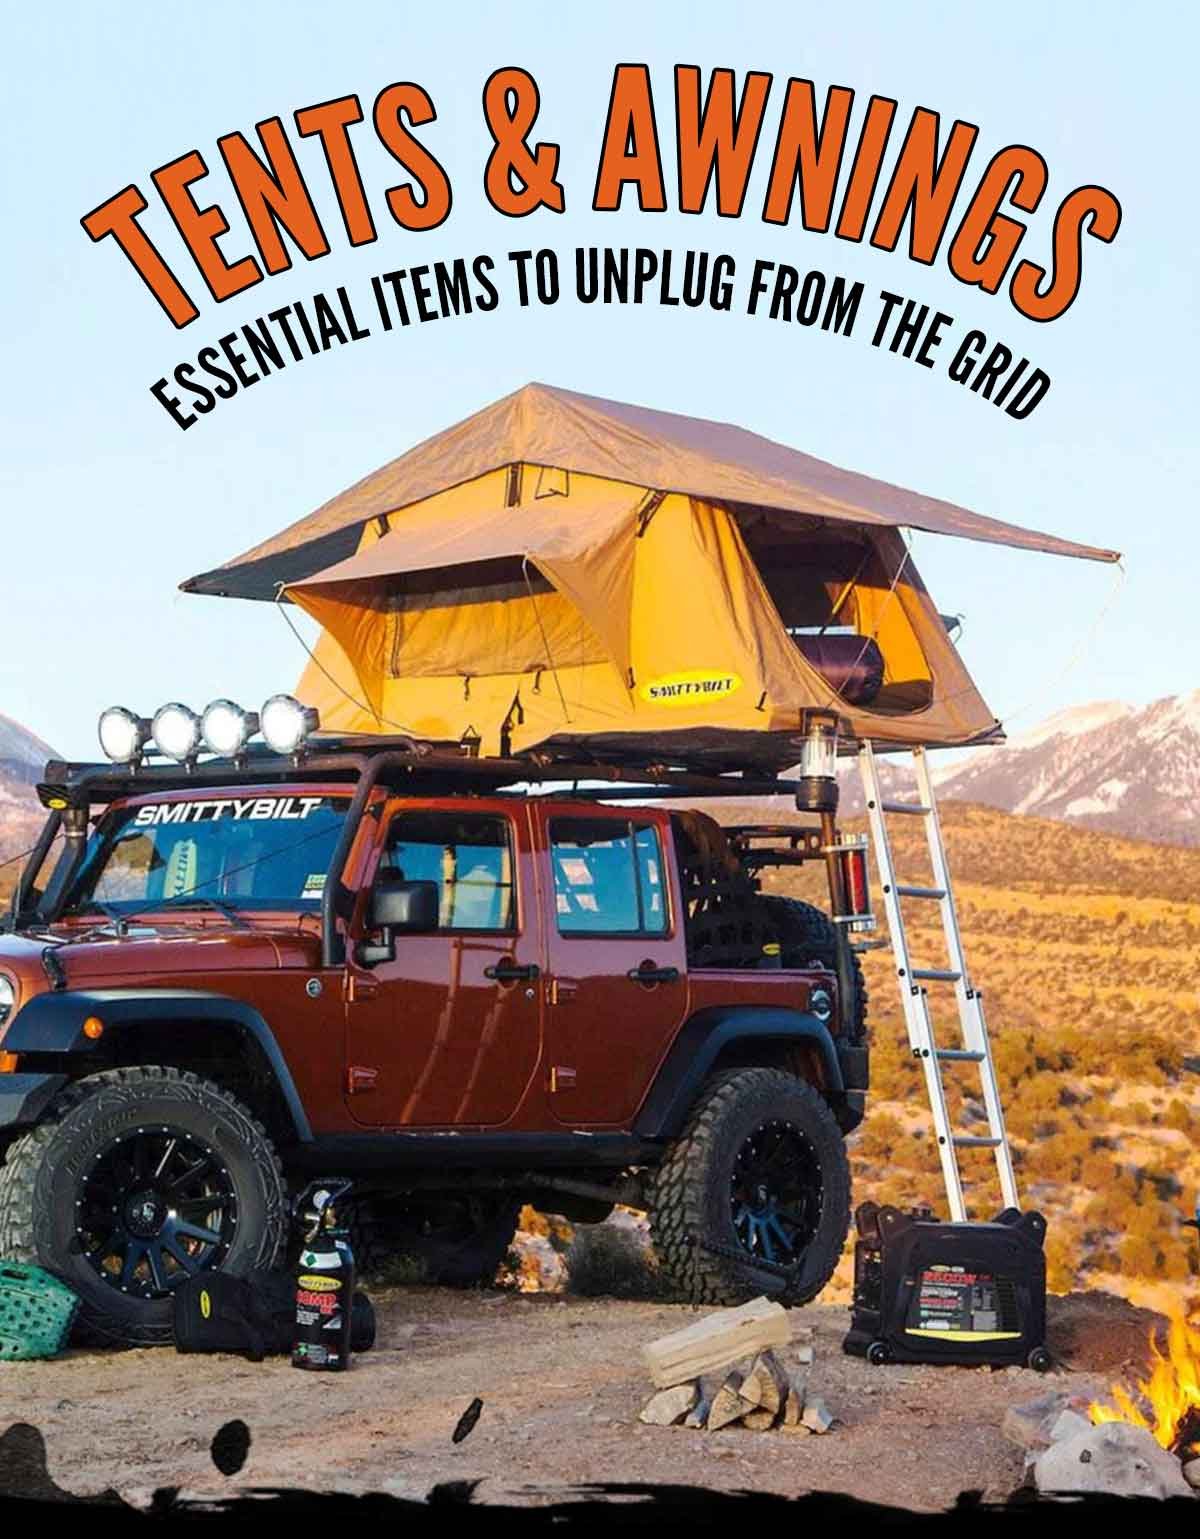 TENTS & AWNINGS Essential Items To Unplug From The Grid